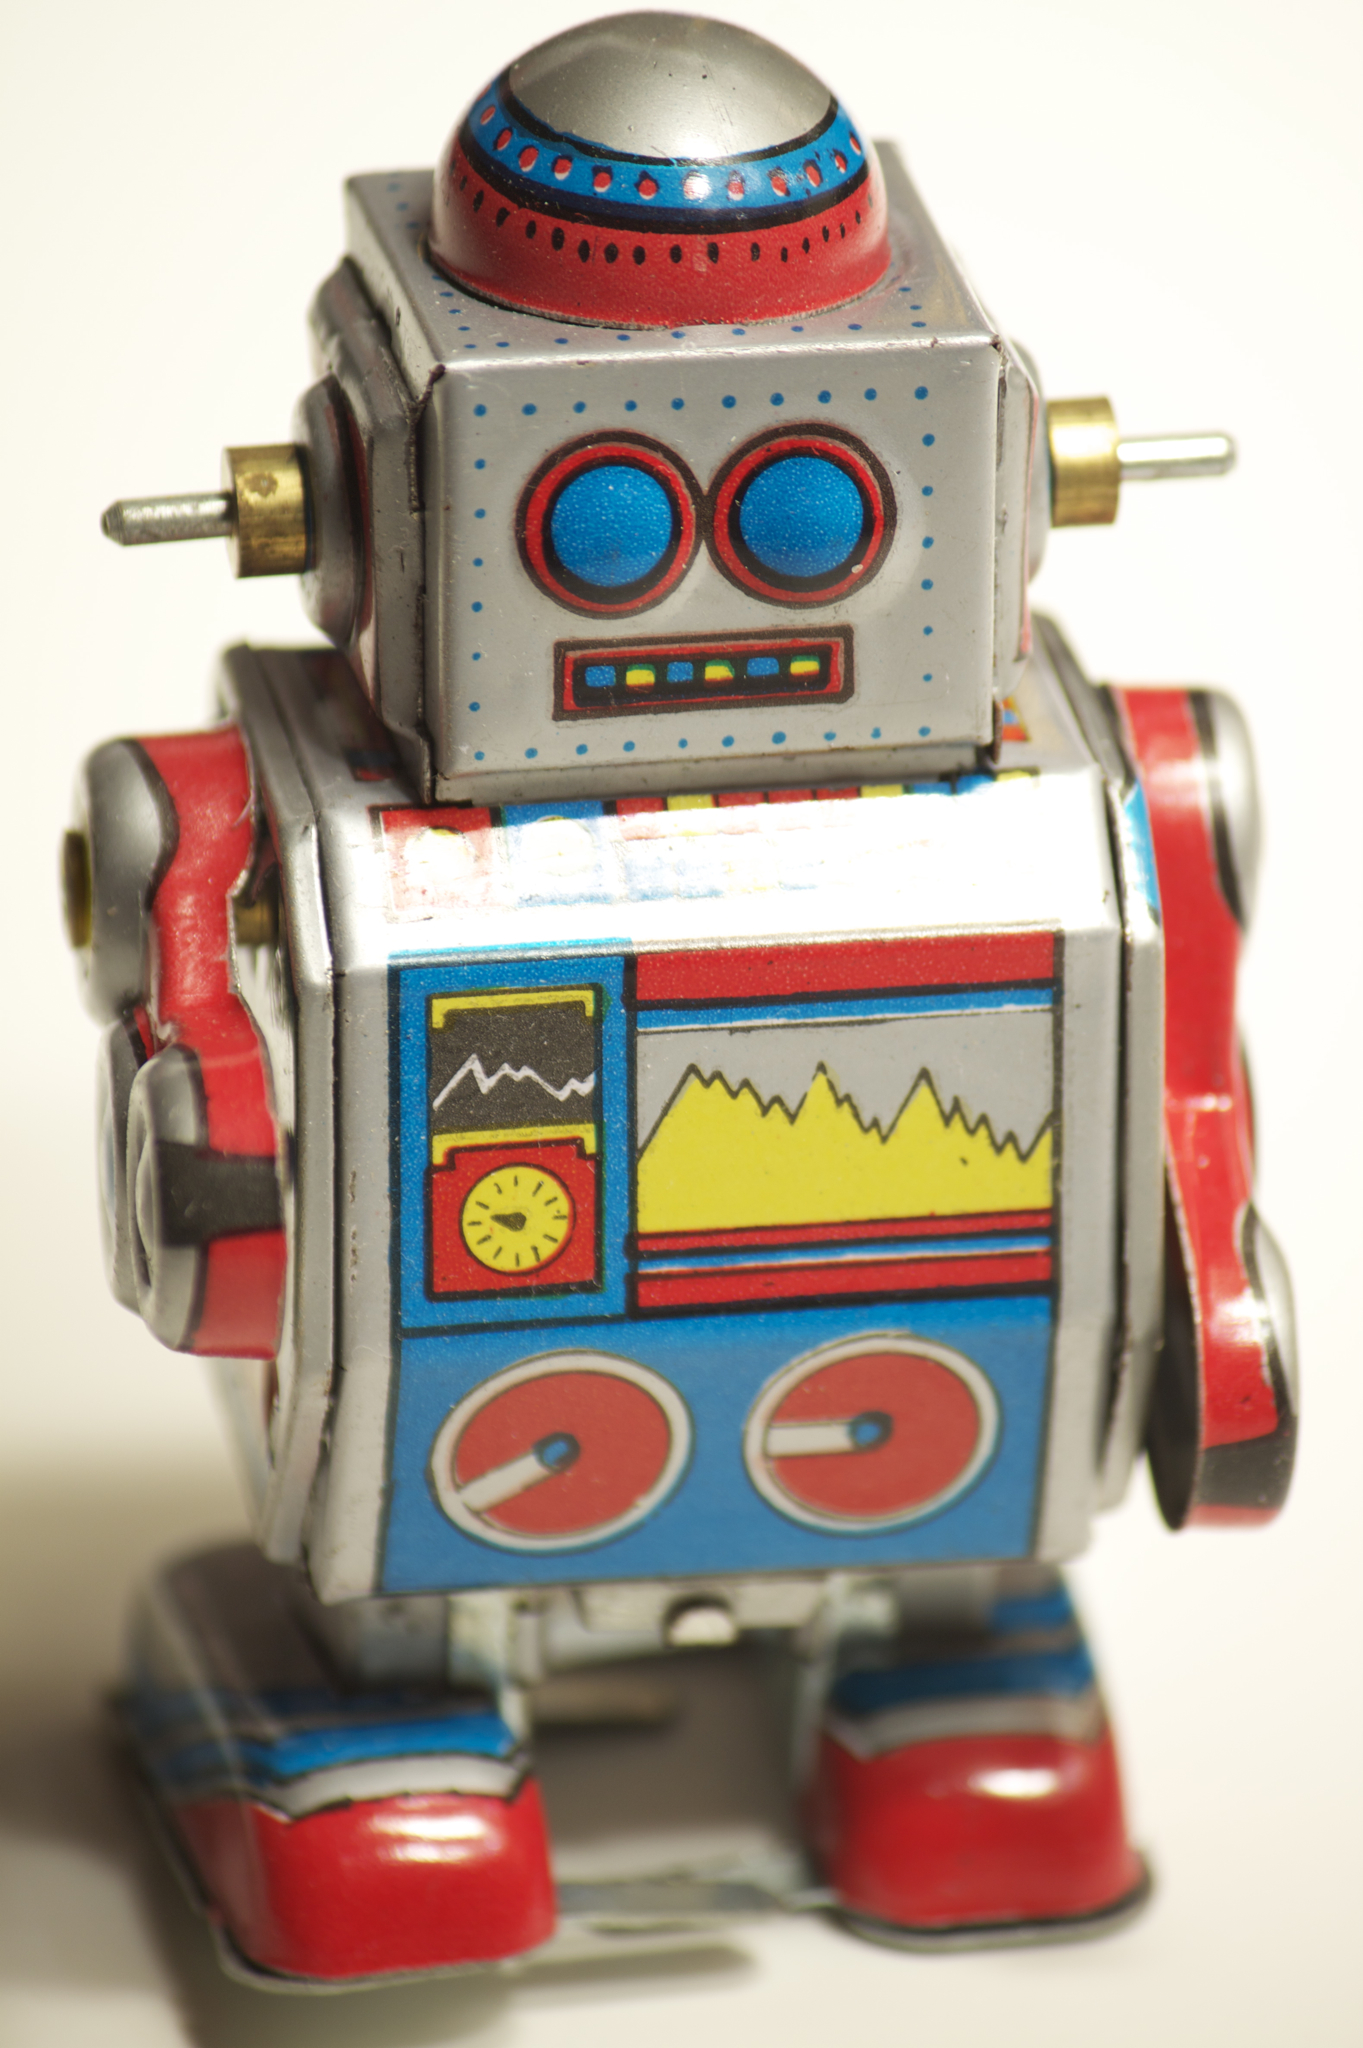 this is a small tin toy robot that looks like it is making a turn